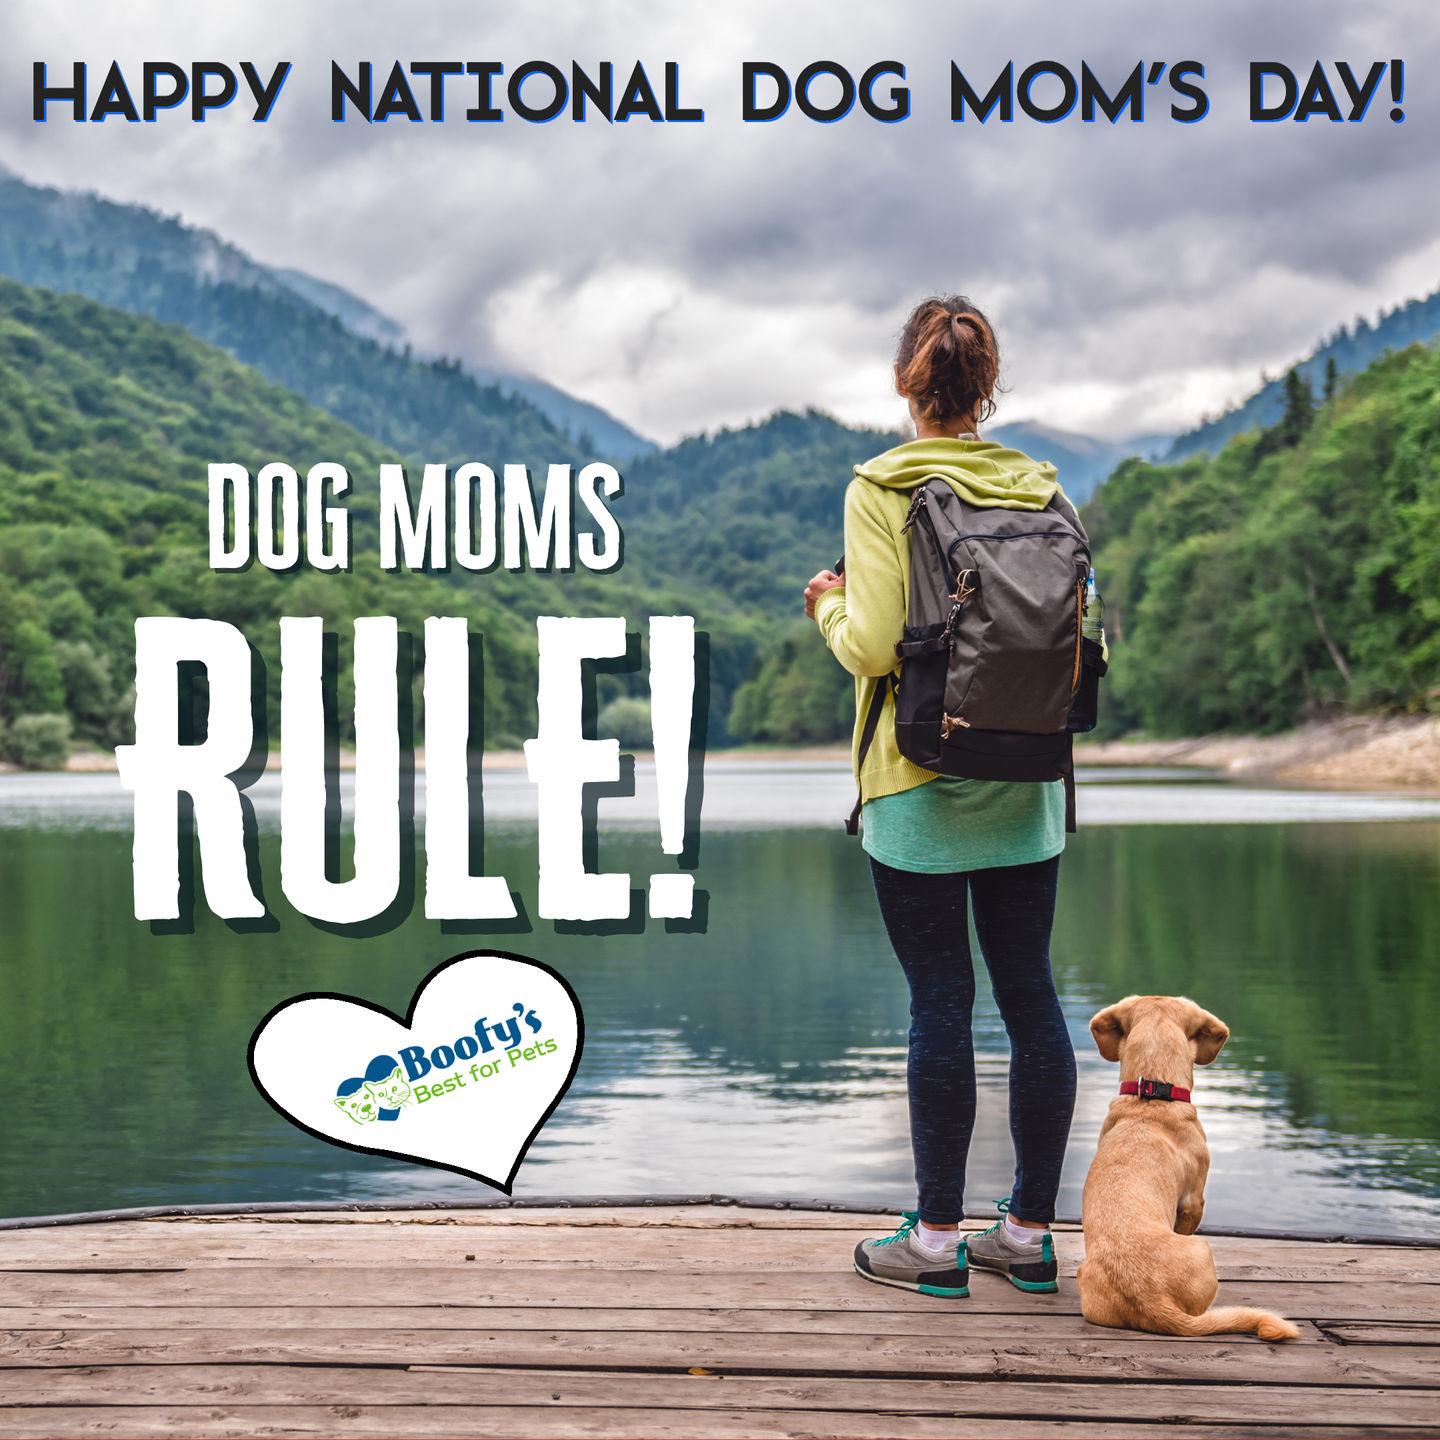 Happy National Dog Mom's Day! Boofy's Best For Pets